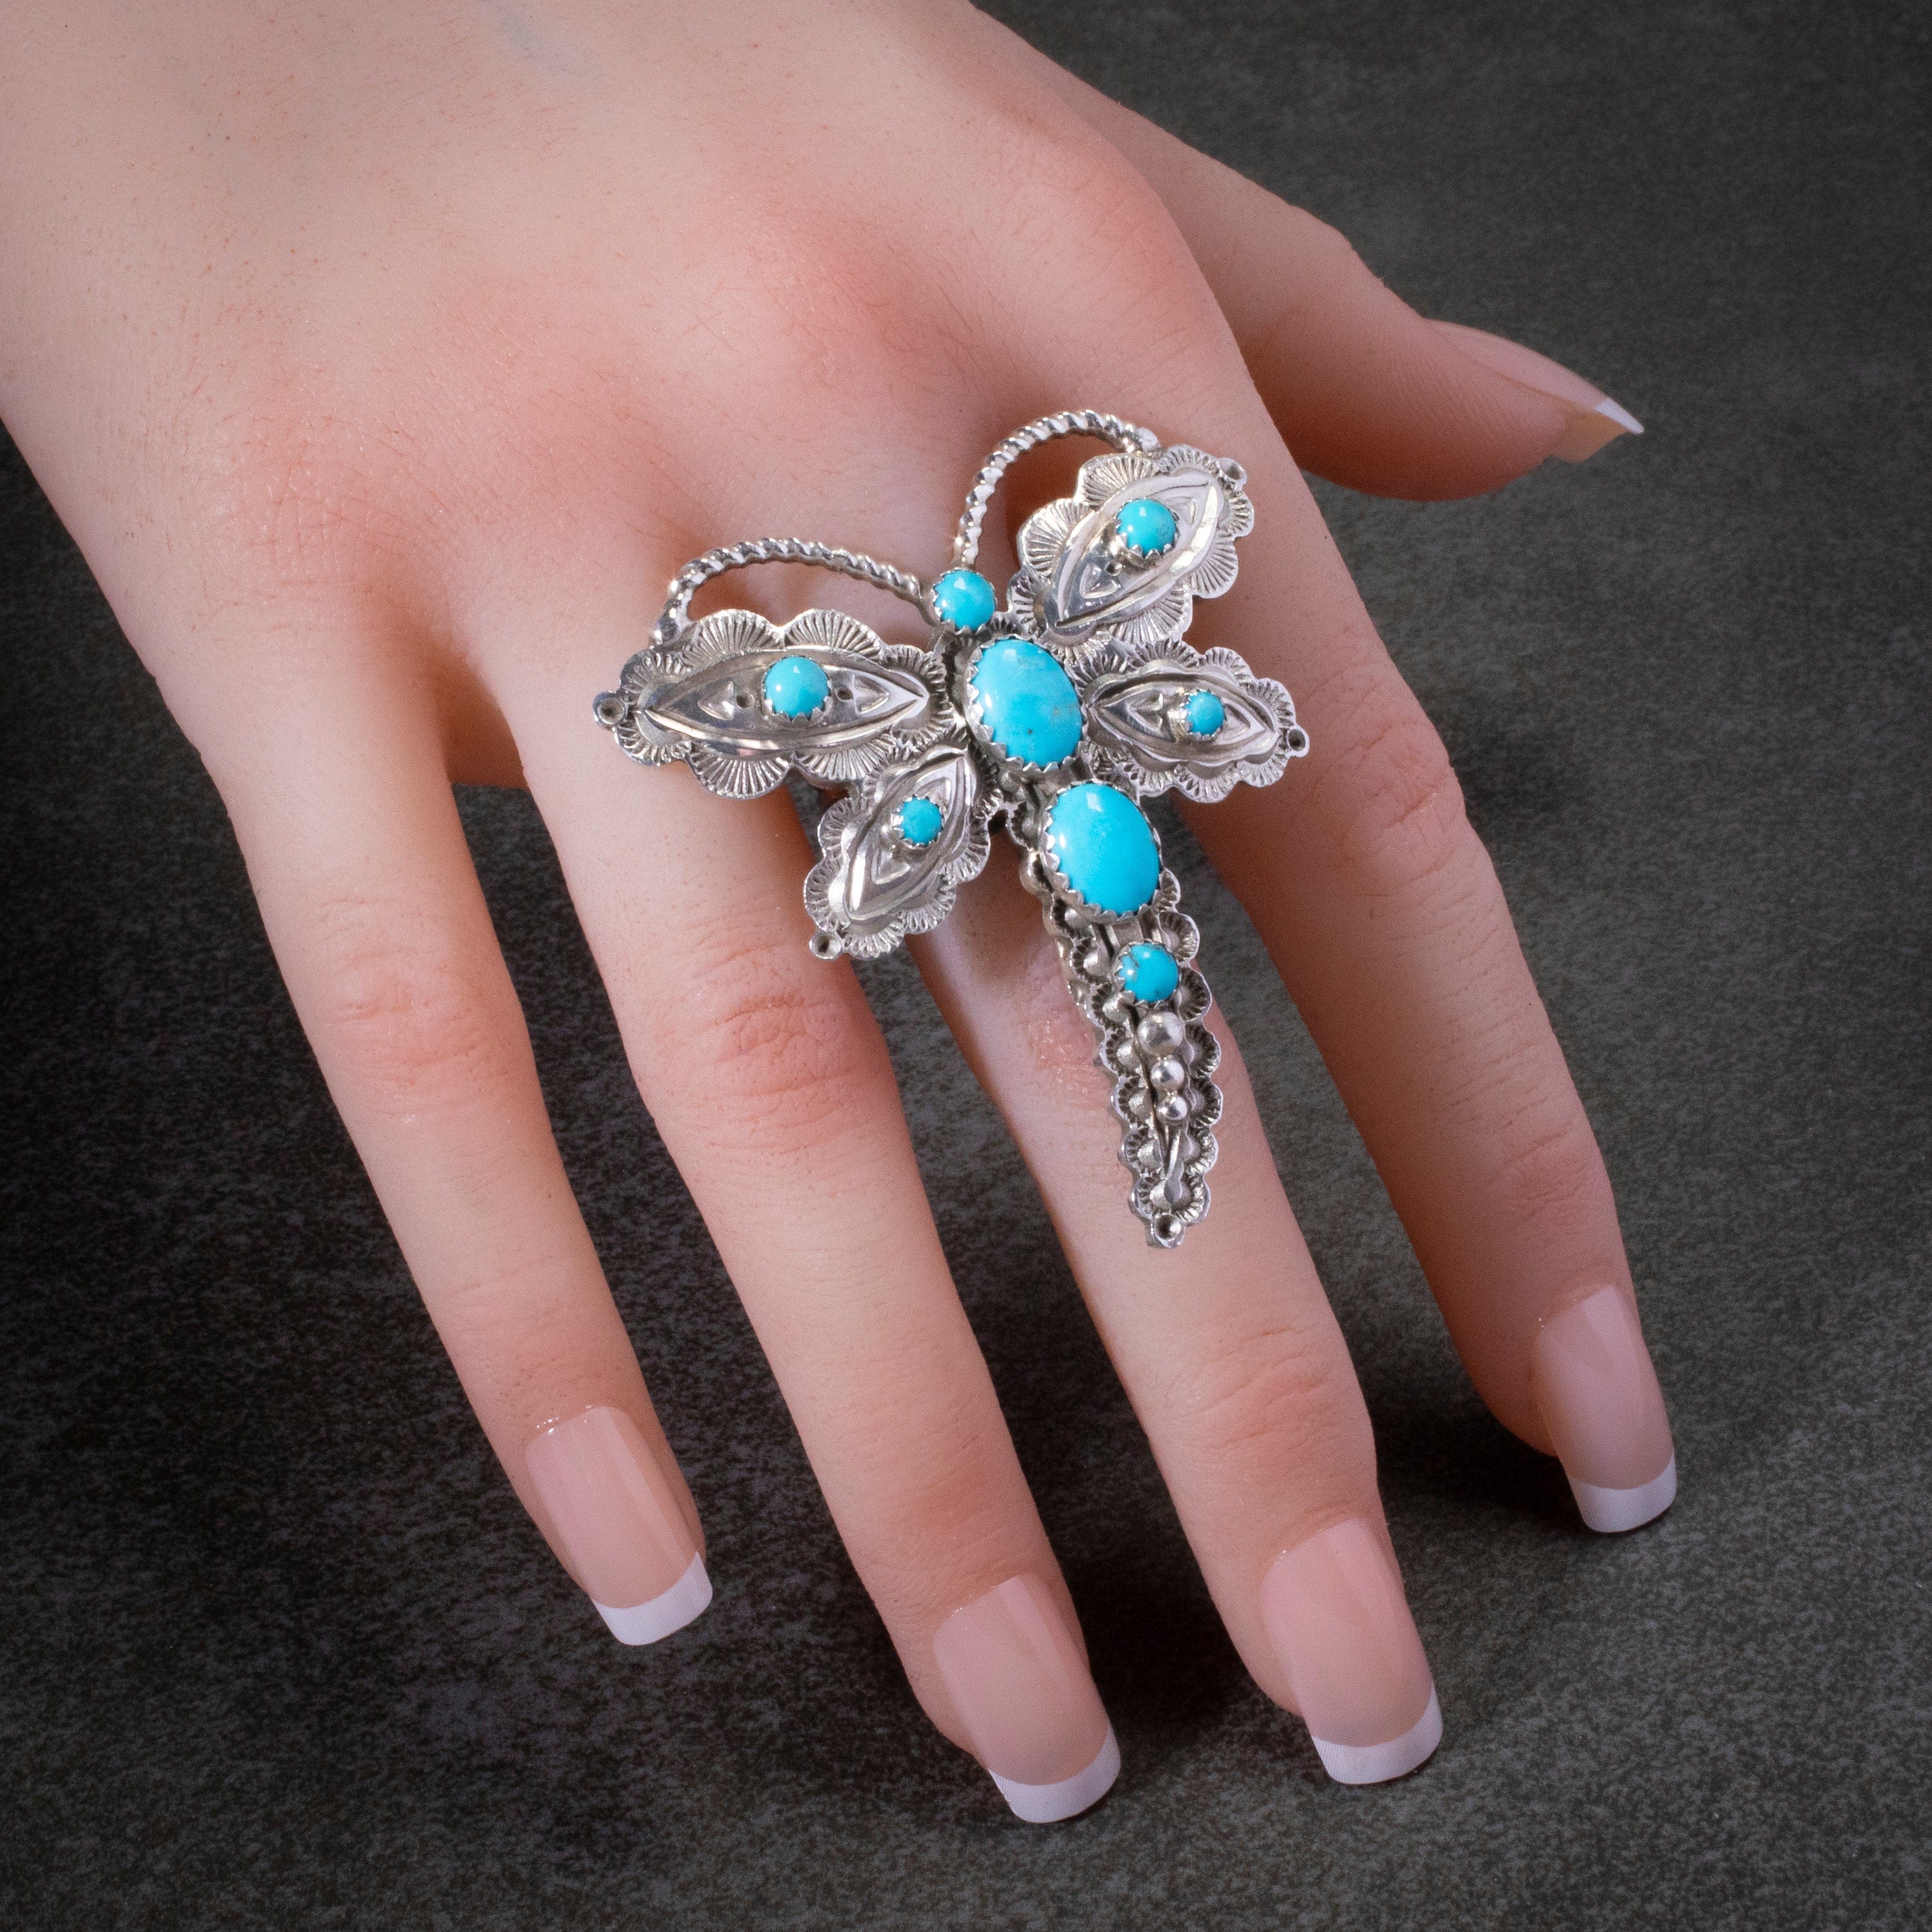 Kalifano Native American Jewelry 8 June Defauito Navajo Kingman Turquoise Dragonfly USA Native American Made 925 Sterling Silver Ring NAR2400.011.8